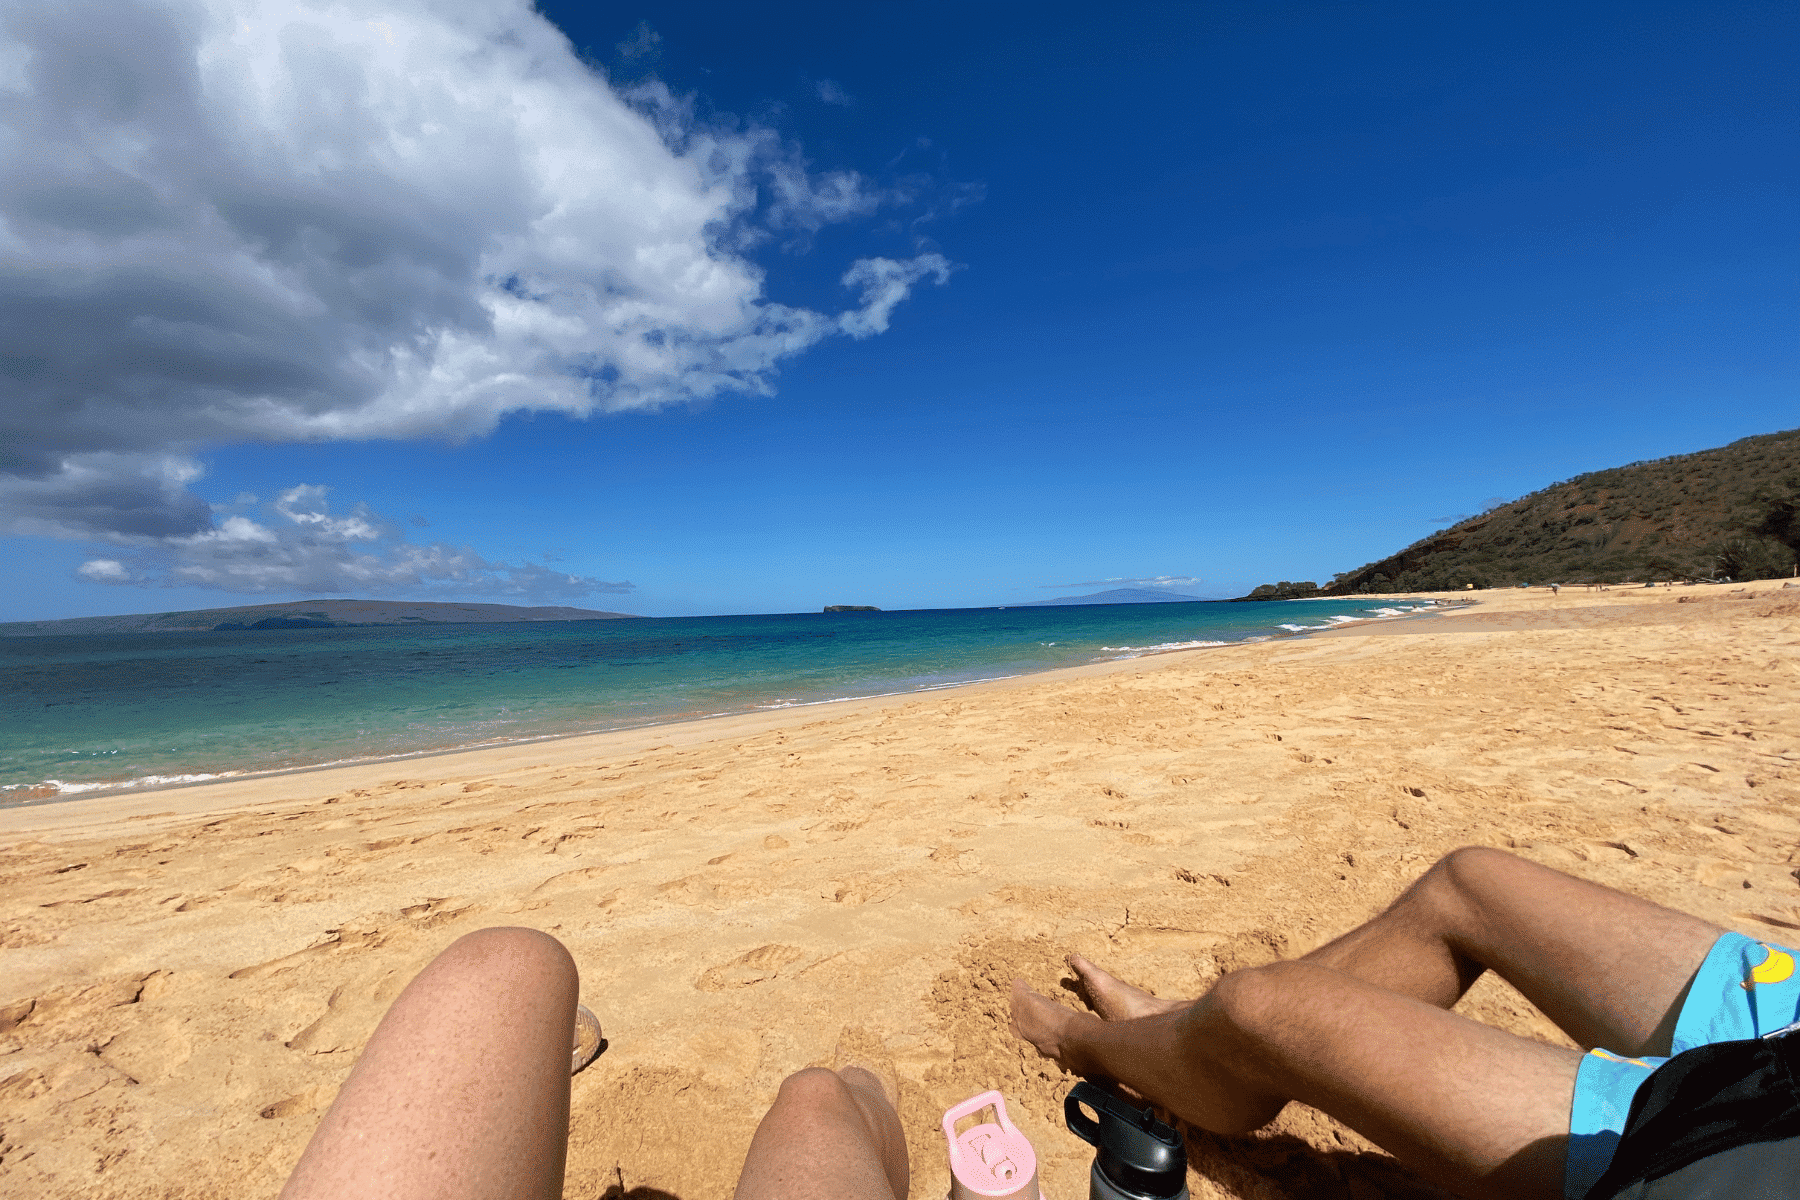 where to stay on maui - couple sitting on south Maui beach. Bright blue ocean in the background and white sand beach